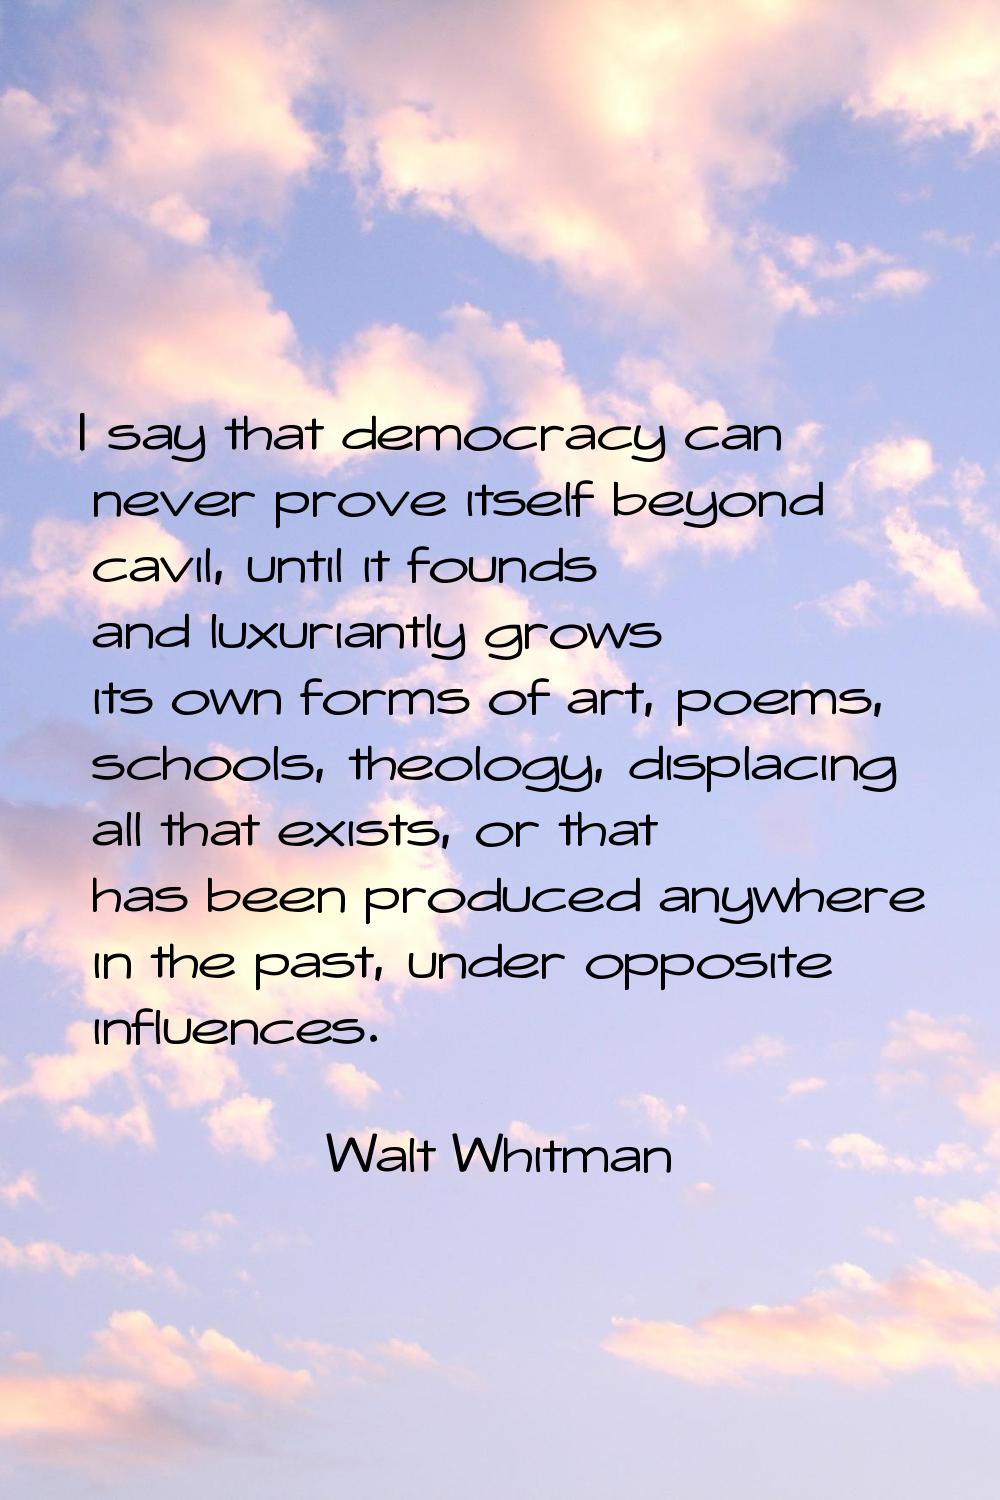 I say that democracy can never prove itself beyond cavil, until it founds and luxuriantly grows its